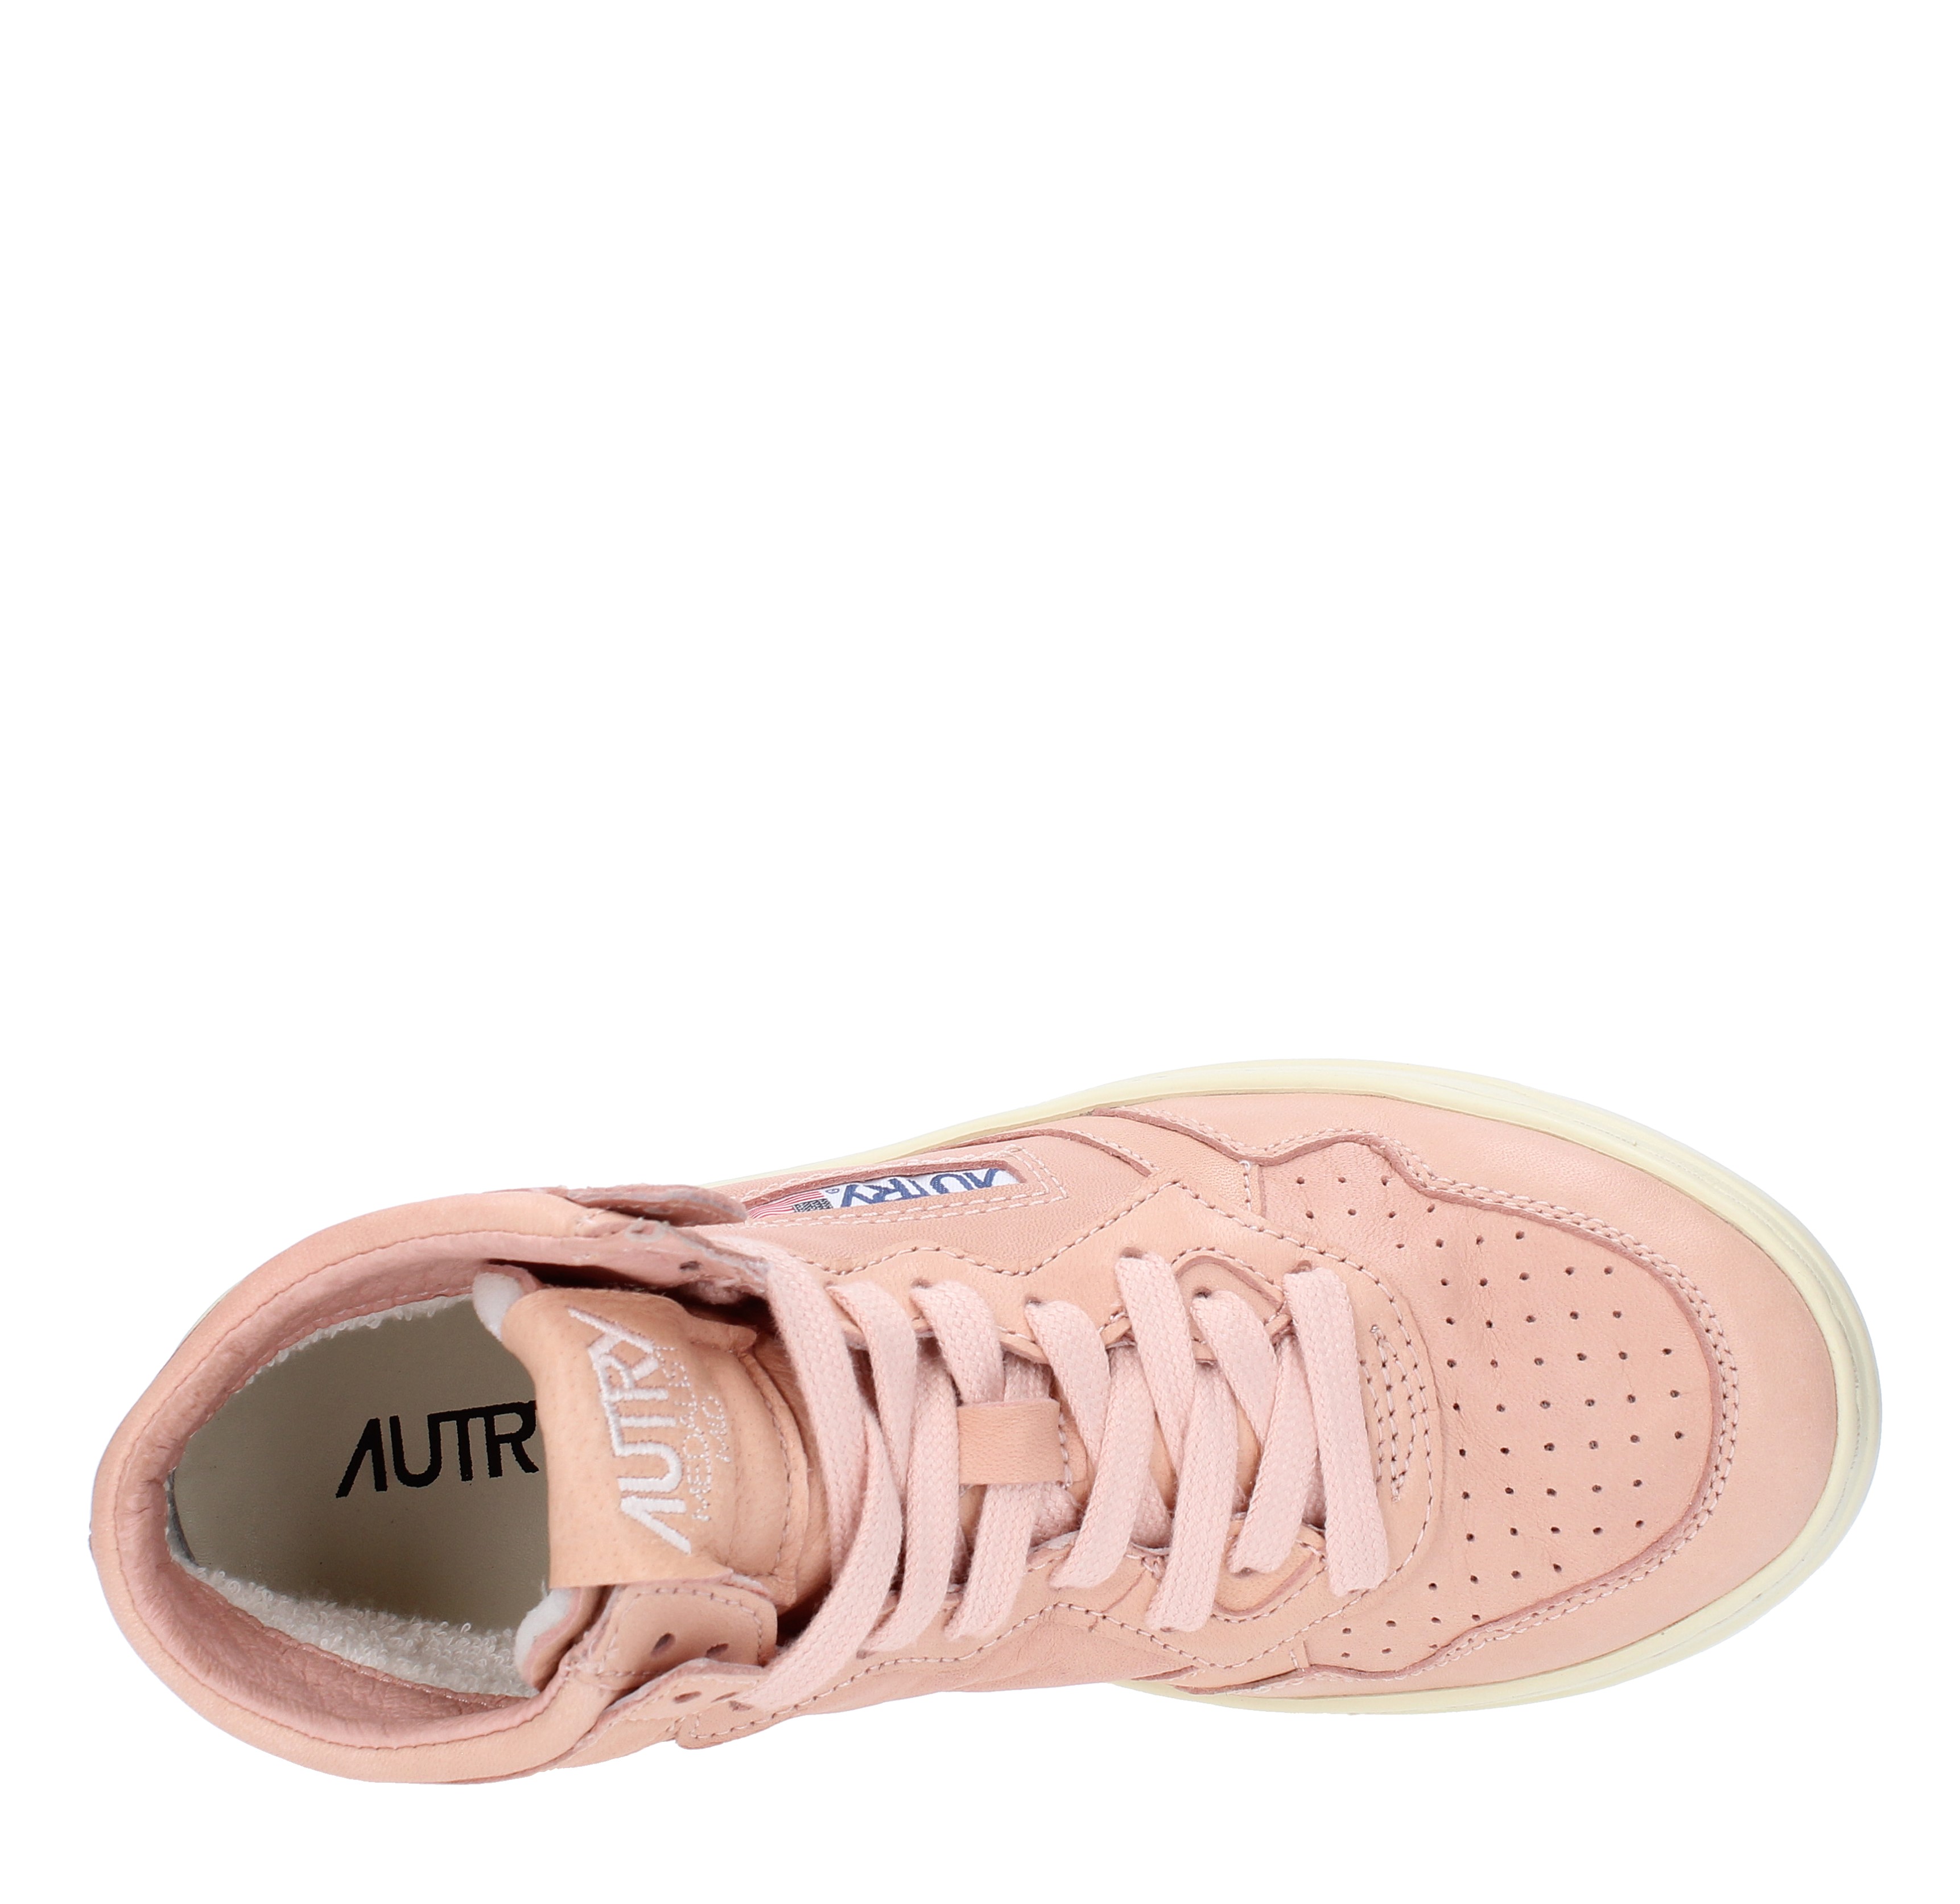 Sneakers alte AUTRY Medalist Mid in pelle - AUTRY - Ginevra calzature